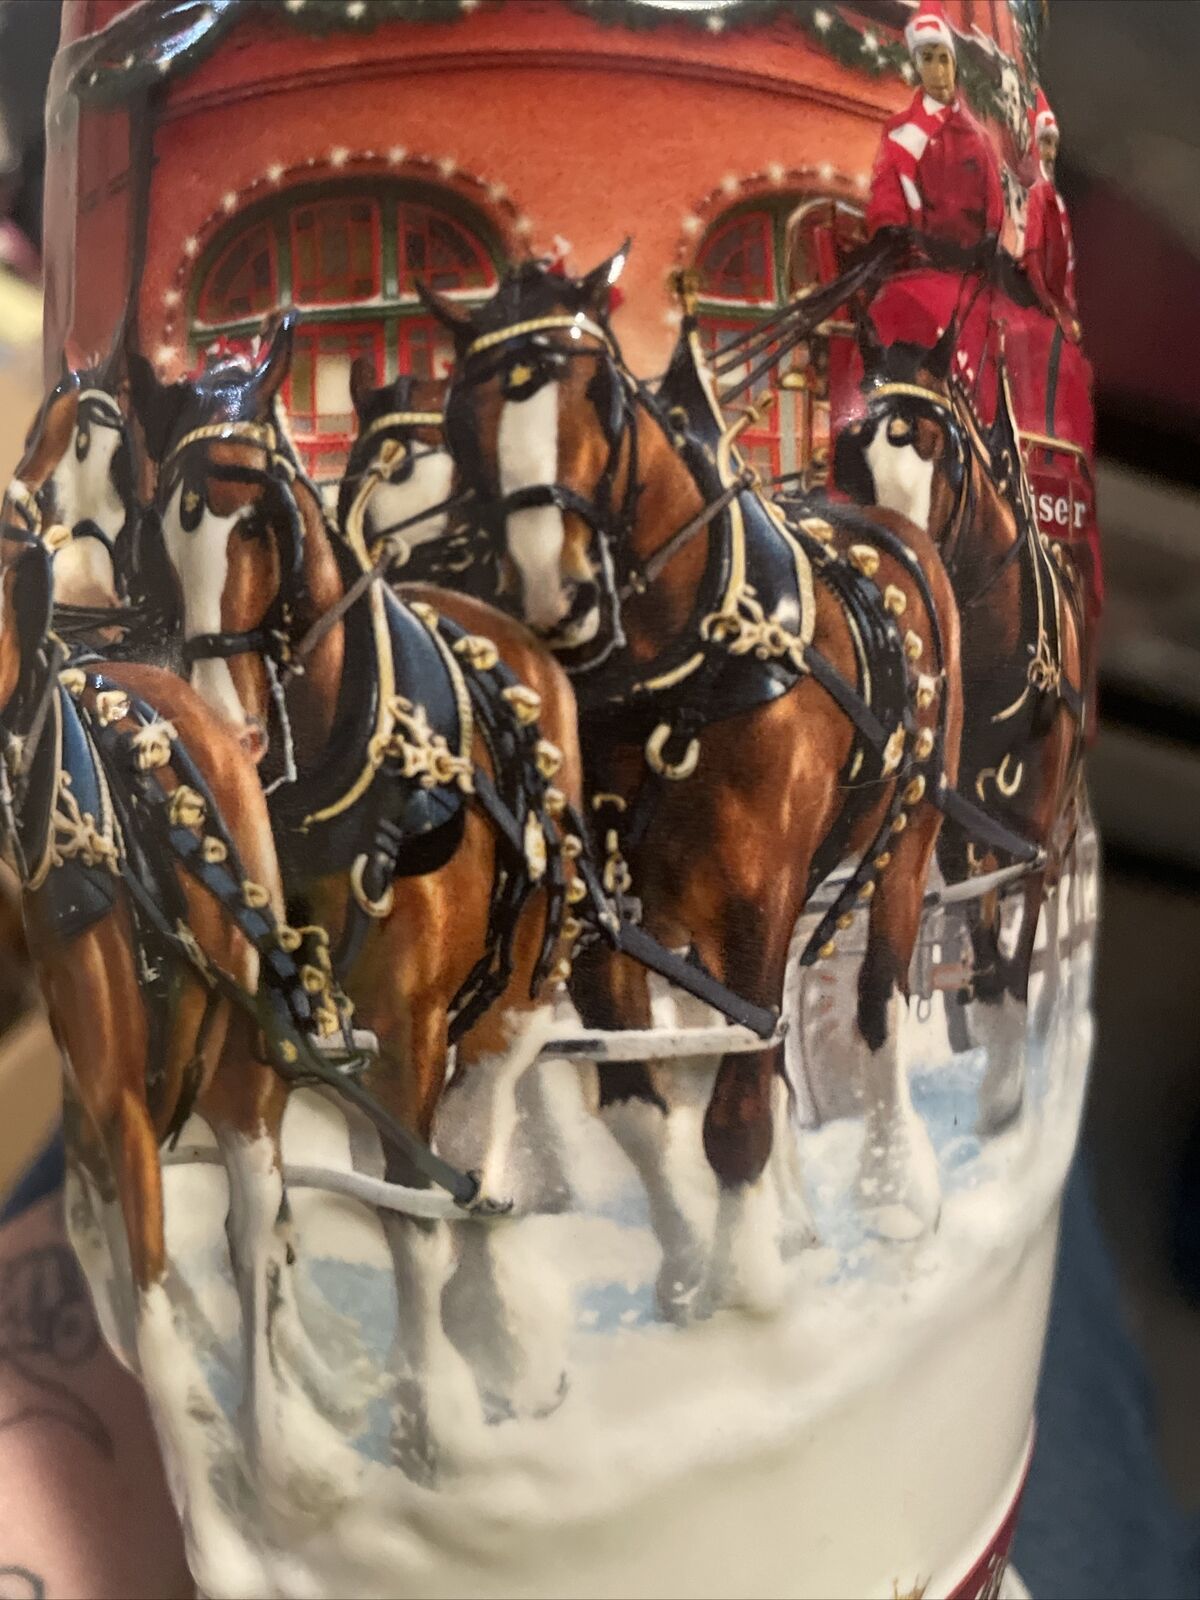 2006 Budweiser Holiday Beer Stein “Sunset at the Stables” Clydesdales C5670 Mug